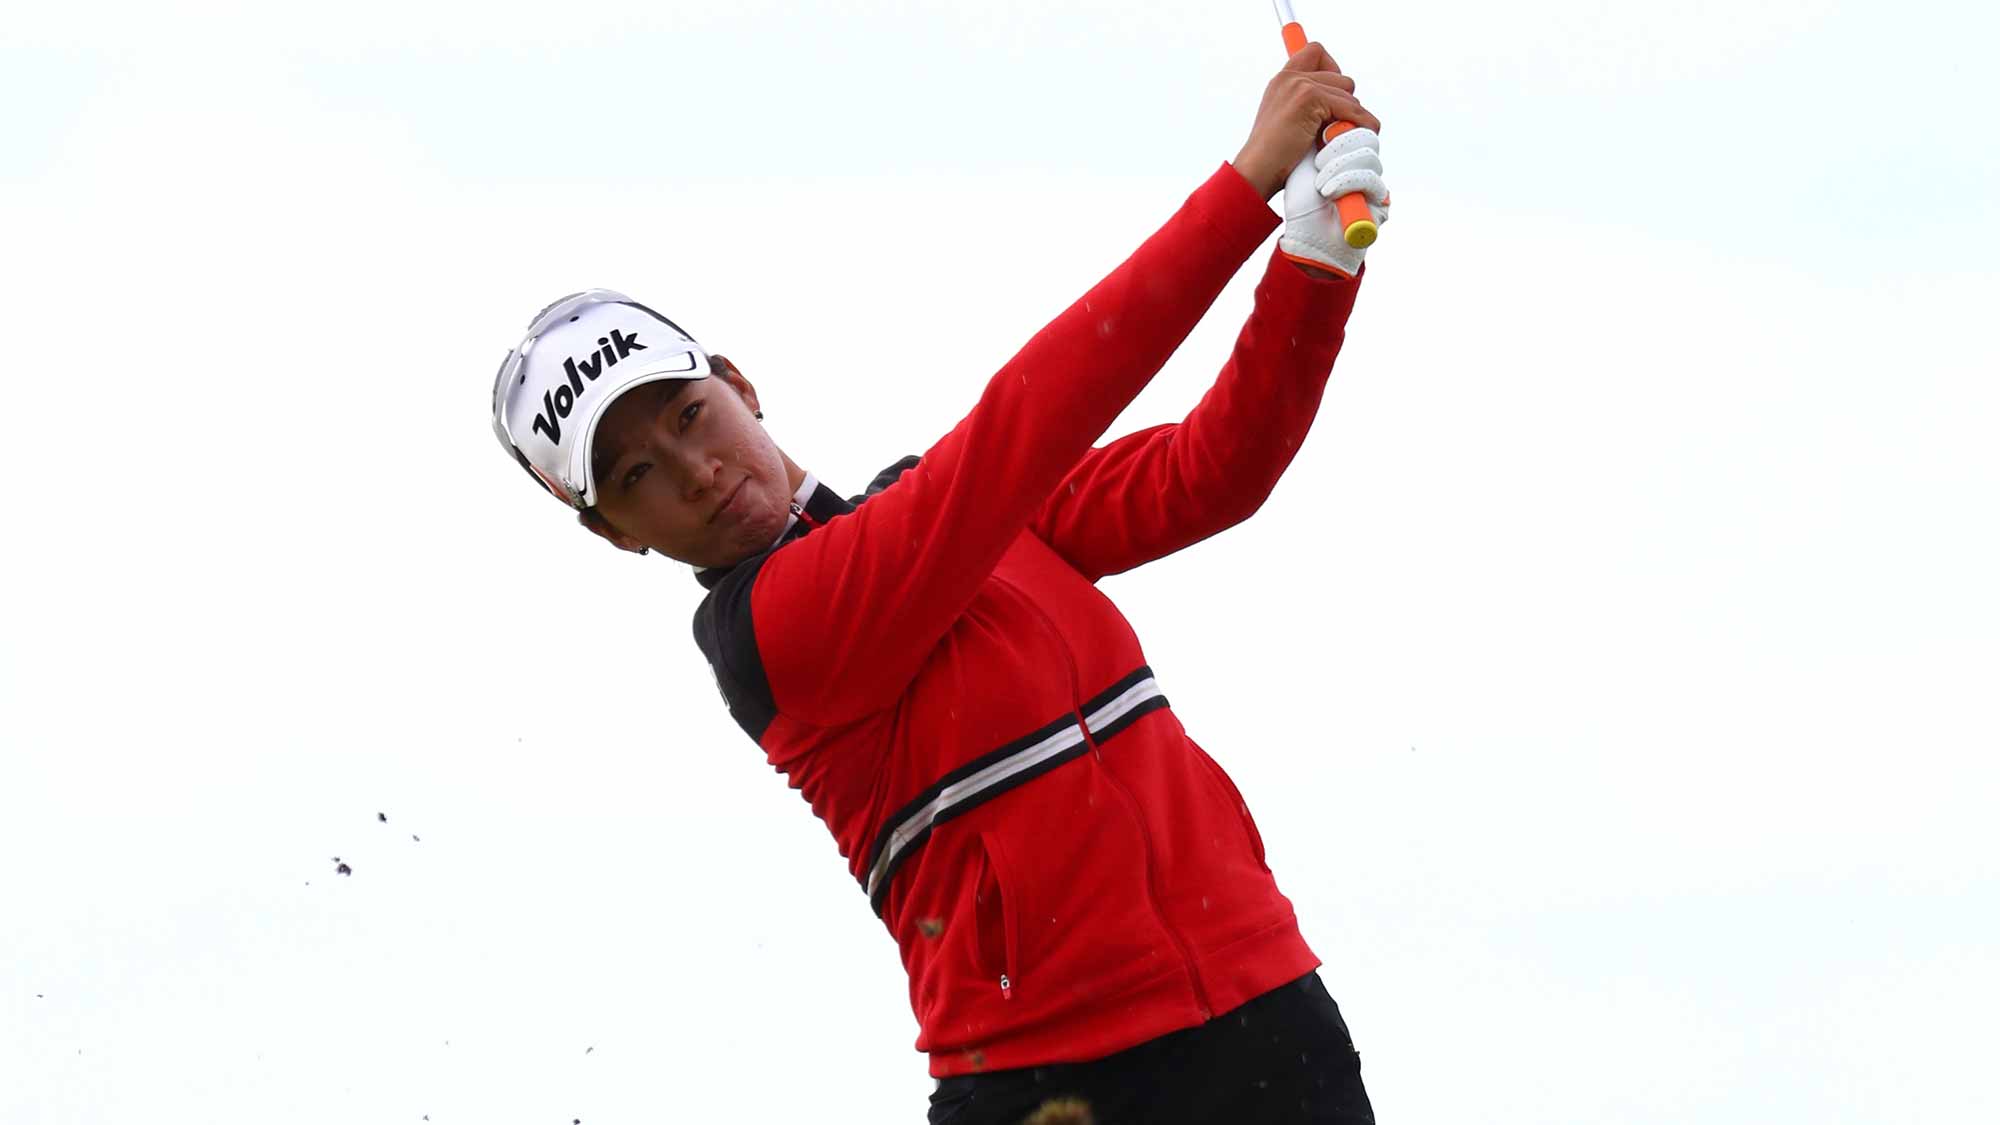 Chella Choi of Korea hits her second shot on the 4th hole during the third round of the Ricoh Women's British Open at Kingsbarns Golf Links